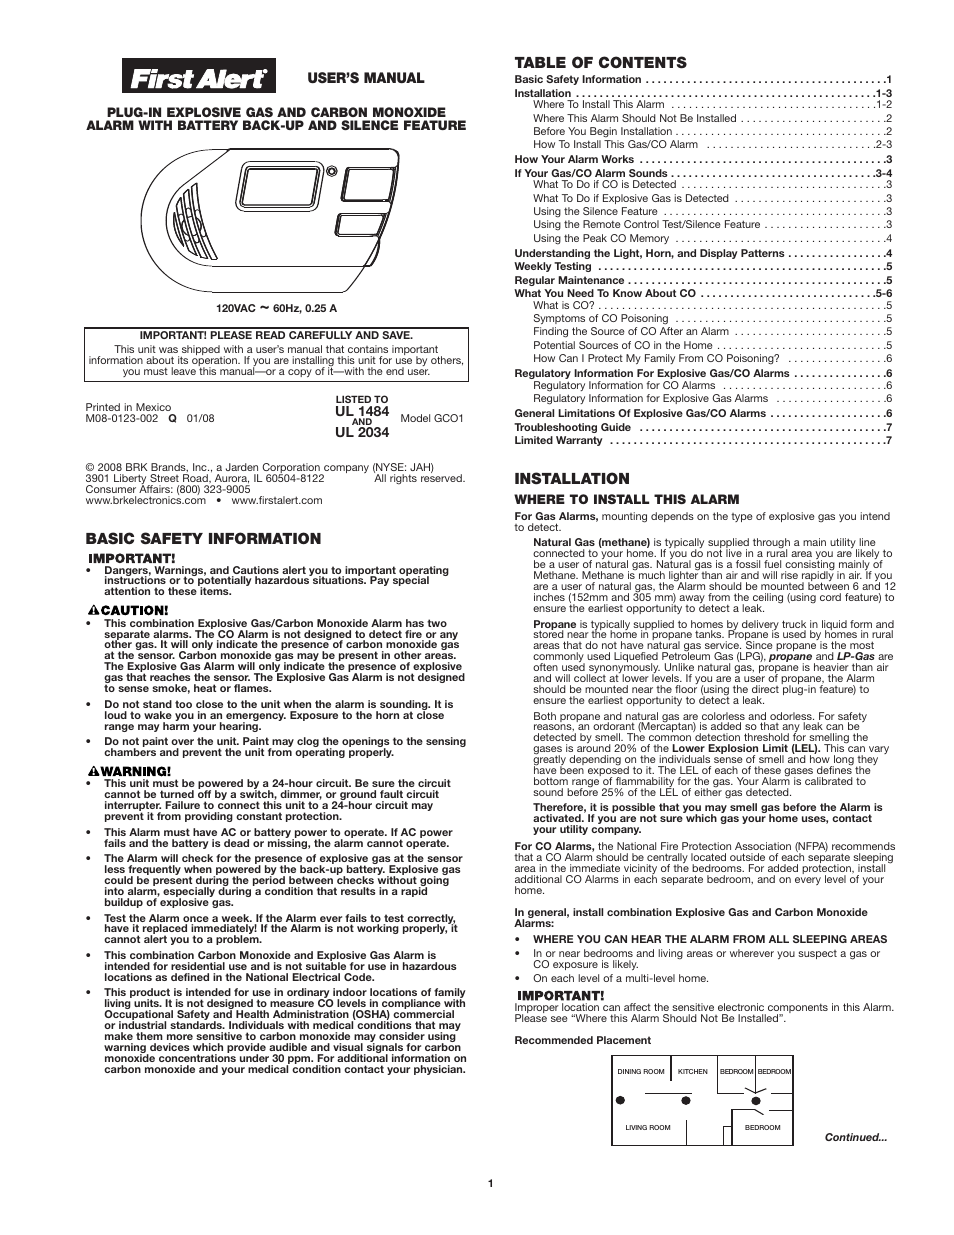 First Alert Model GCO1 User Manual | 7 pages